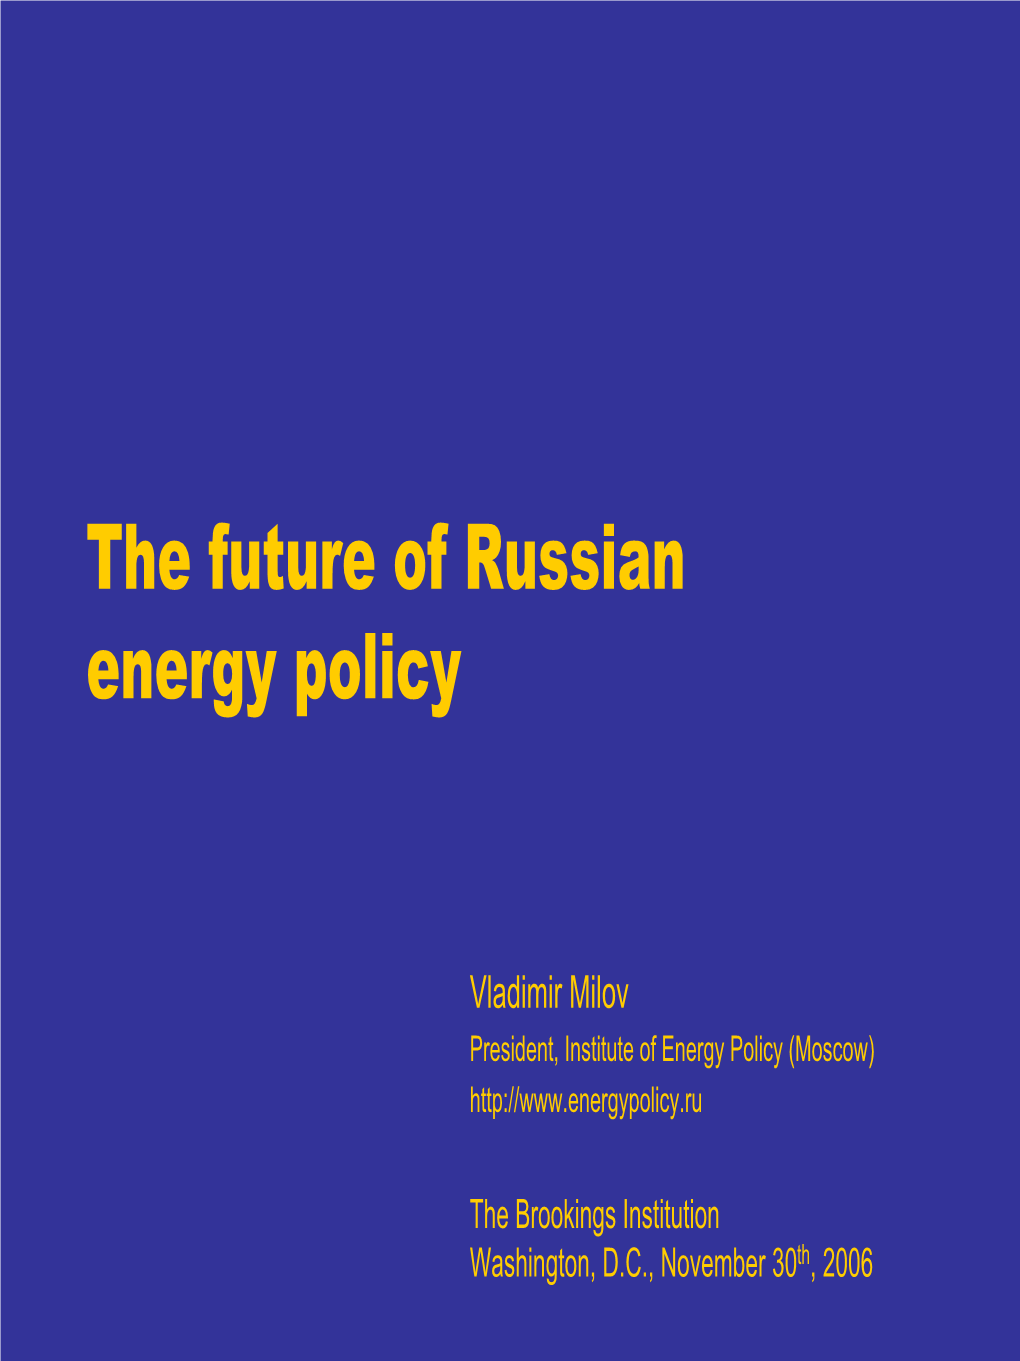 The Future of Russian Energy Policy